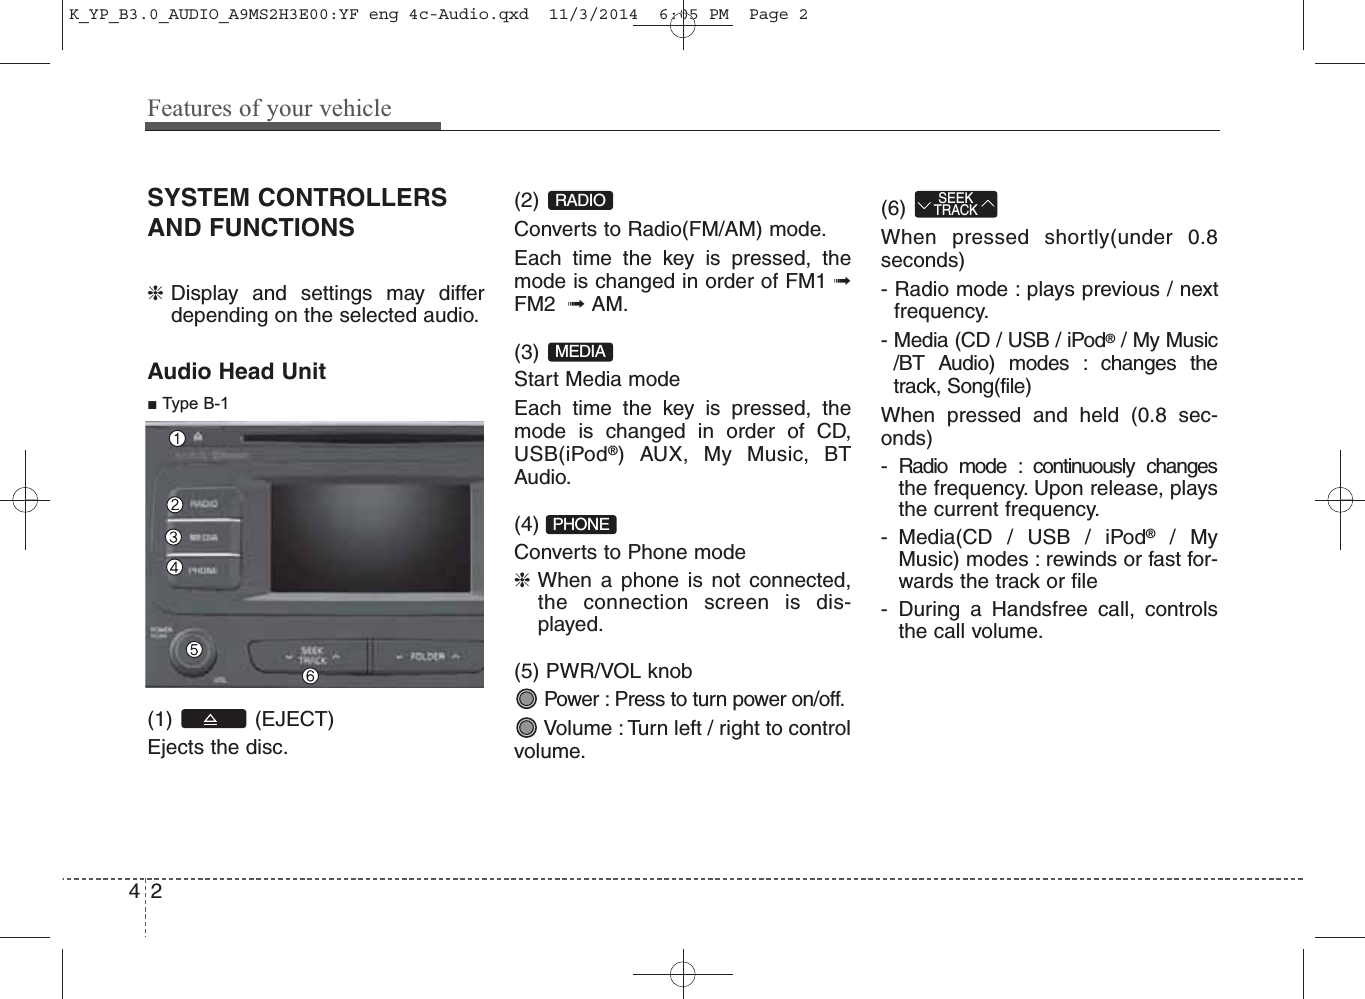 SYSTEM CONTROLLERSAND FUNCTIONS ❈Display and settings may differdepending on the selected audio.Audio Head Unit (1) (EJECT)Ejects the disc.(2) Converts to Radio(FM/AM) mode.Each time the key is pressed, themode is changed in order of FM1 ➟FM2  ➟AM.(3) Start Media modeEach time the key is pressed, themode is changed in order of CD,USB(iPod®) AUX, My Music, BTAudio.(4)Converts to Phone mode❈When a phone is not connected,the connection screen is dis-played.(5) PWR/VOL knobPower : Press to turn power on/off.Volume : Turn left / right to controlvolume.(6) When pressed shortly(under 0.8seconds)- Radio mode : plays previous / nextfrequency.- Media (CD / USB / iPod®/ My Music/BT Audio) modes : changes thetrack, Song(file)When pressed and held (0.8 sec-onds)- Radio mode : continuously changesthe frequency. Upon release, playsthe current frequency.- Media(CD / USB / iPod®/ MyMusic) modes : rewinds or fast for-wards the track or file- During a Handsfree call, controlsthe call volume.SEEKTRACKPHONEMEDIARADIO■ Type B-142Features of your vehicleK_YP_B3.0_AUDIO_A9MS2H3E00:YF eng 4c-Audio.qxd  11/3/2014  6:05 PM  Page 2